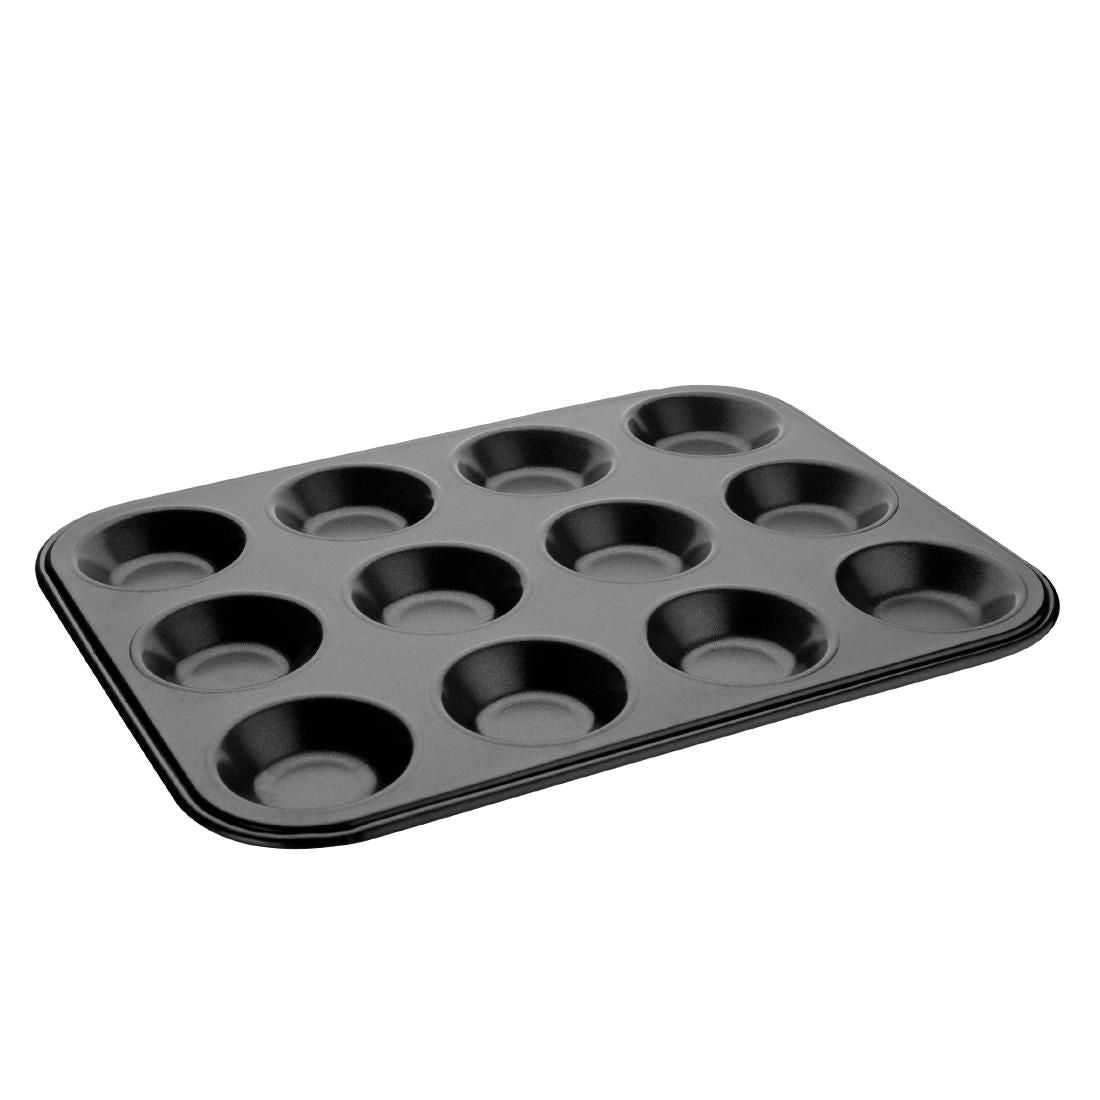 GD013 Vogue Carbon Steel Non-Stick Mini Muffin Tray 12 Cup JD Catering Equipment Solutions Ltd